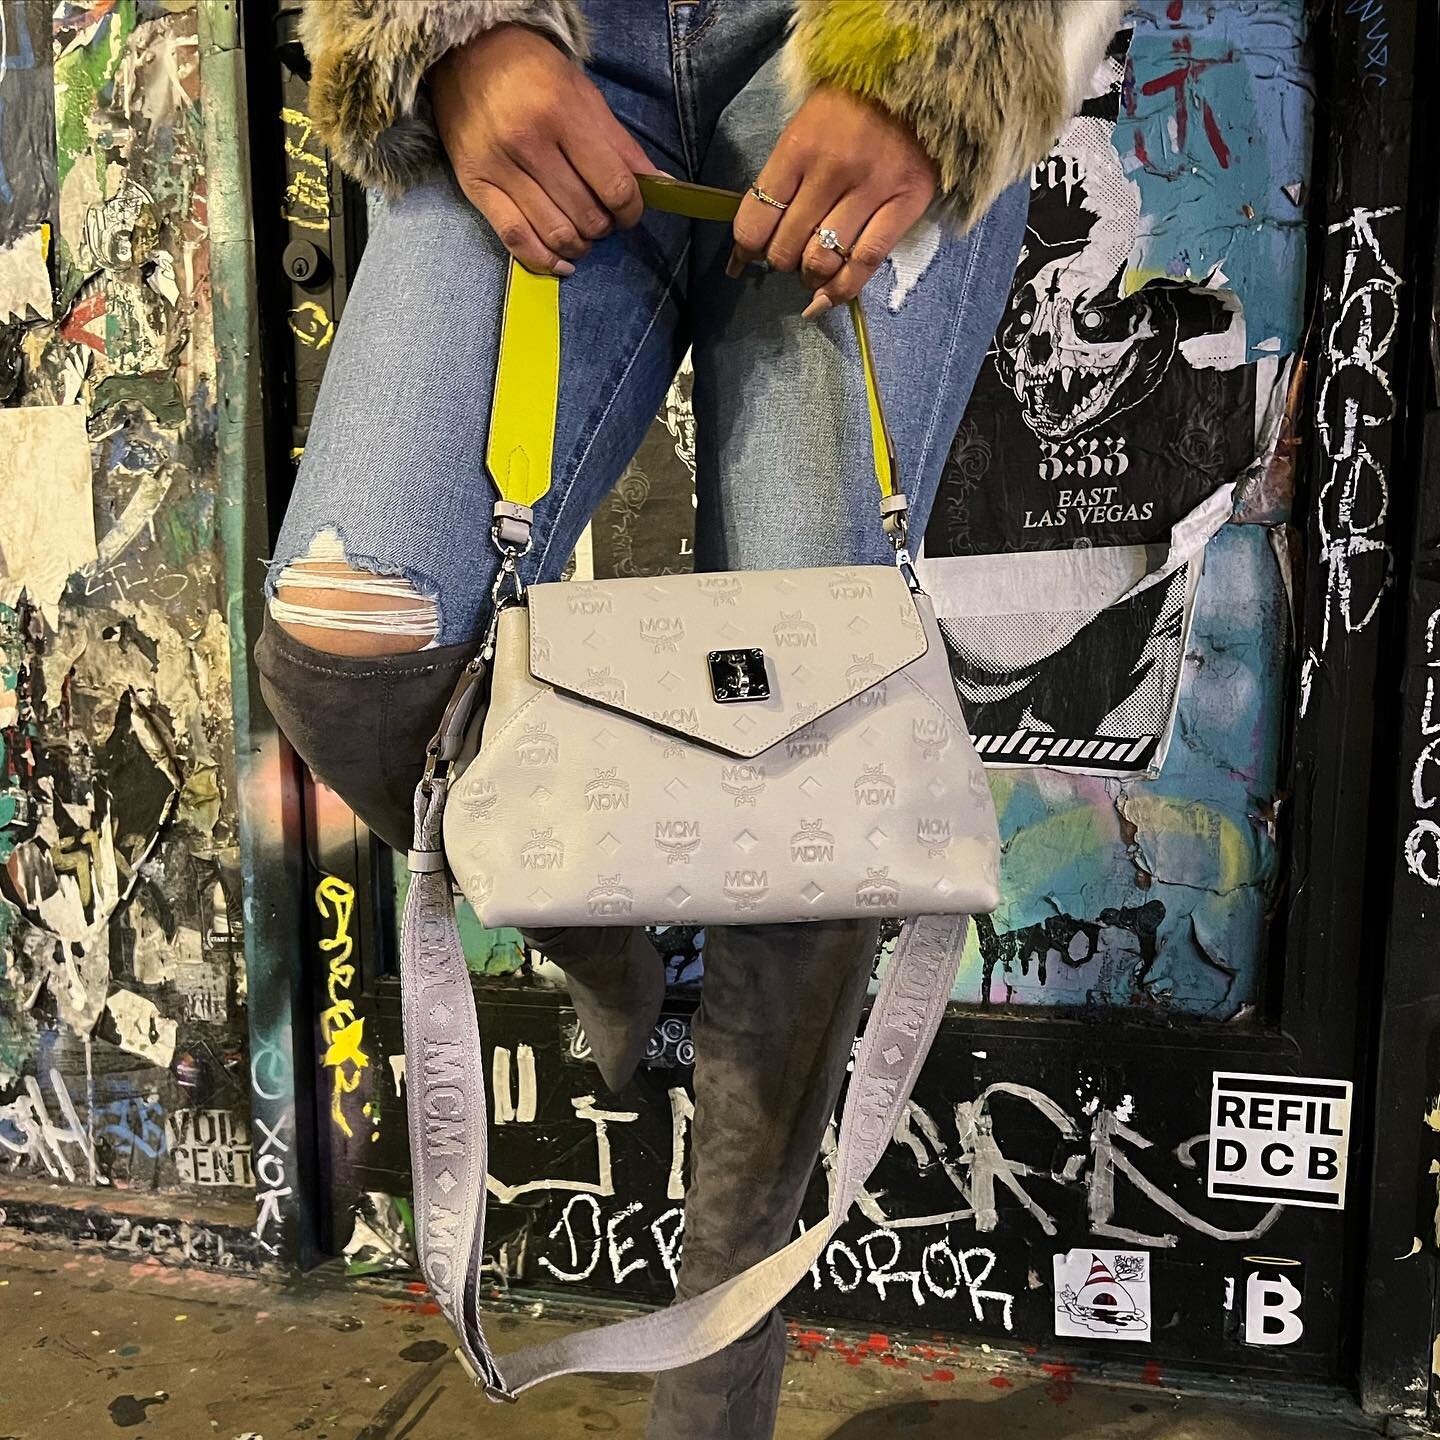 🚨SOLD🚨 MCM | Small Essential Crossbody In Monogram Leather Gray
.
.
.
To book an appointment 
✨Direct Message (DM)
✨Text (702) 935-6010
✨email sales@junkjeans.com
✨or visit junkjeans.com
.
.
.

___________________

Disclaimer:  To avoid likelihood 